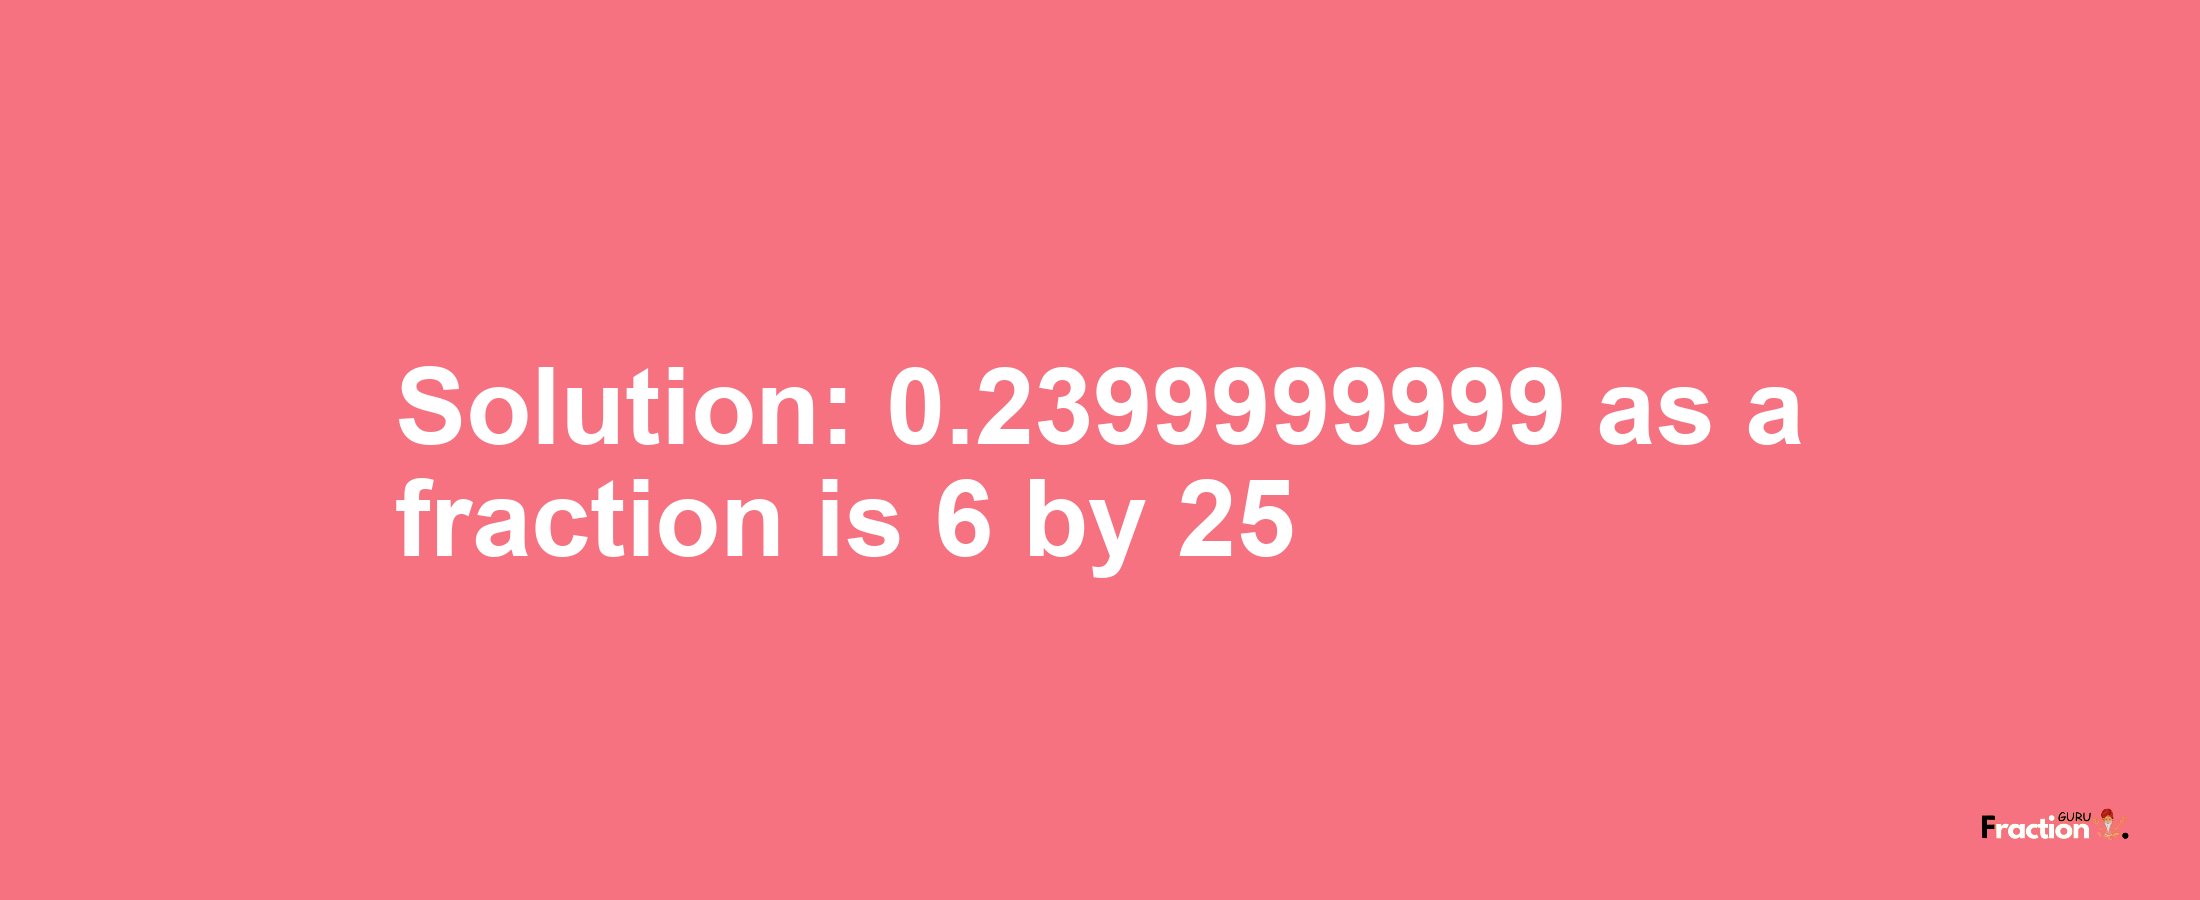 Solution:0.2399999999 as a fraction is 6/25